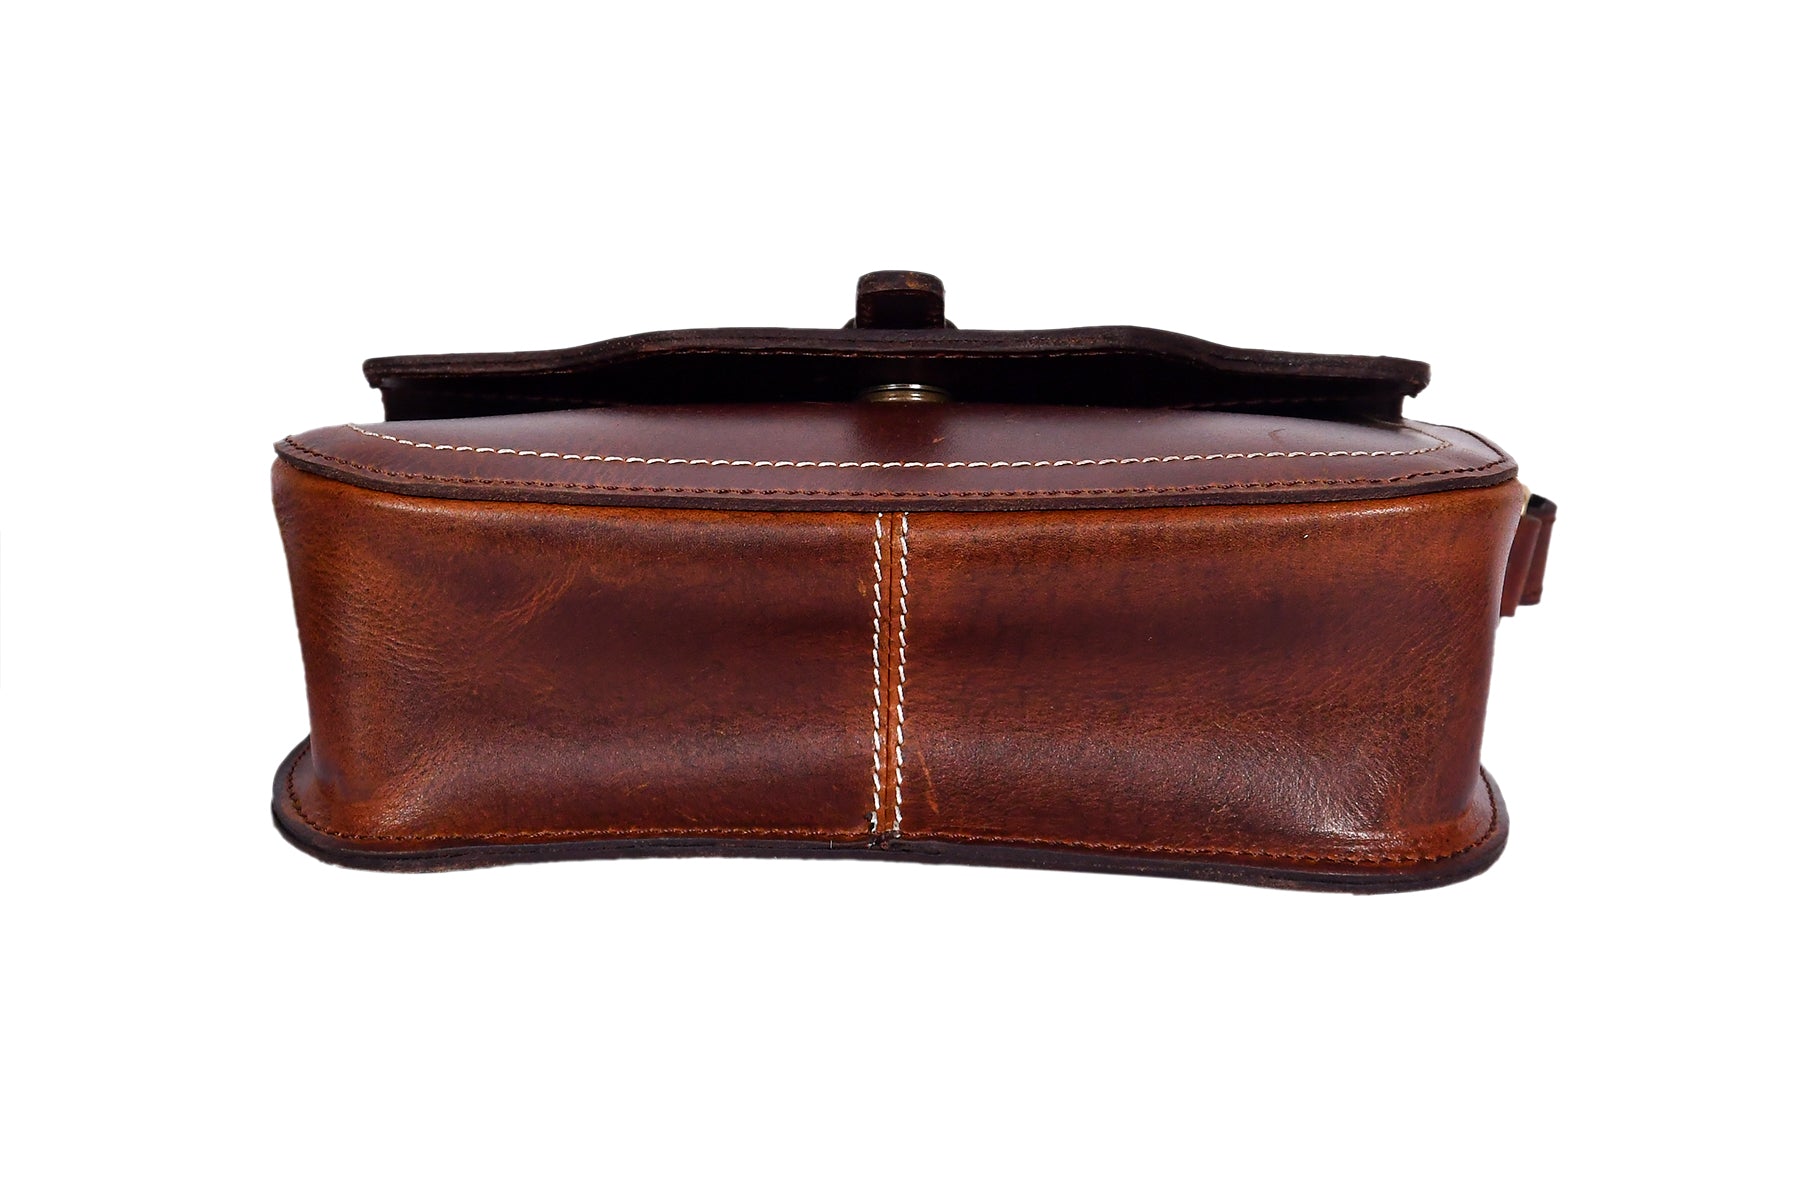 Elevate Your Style with our Brown Leather Sling Bag – The Perfect Fashion Accessory. - CELTICINDIA